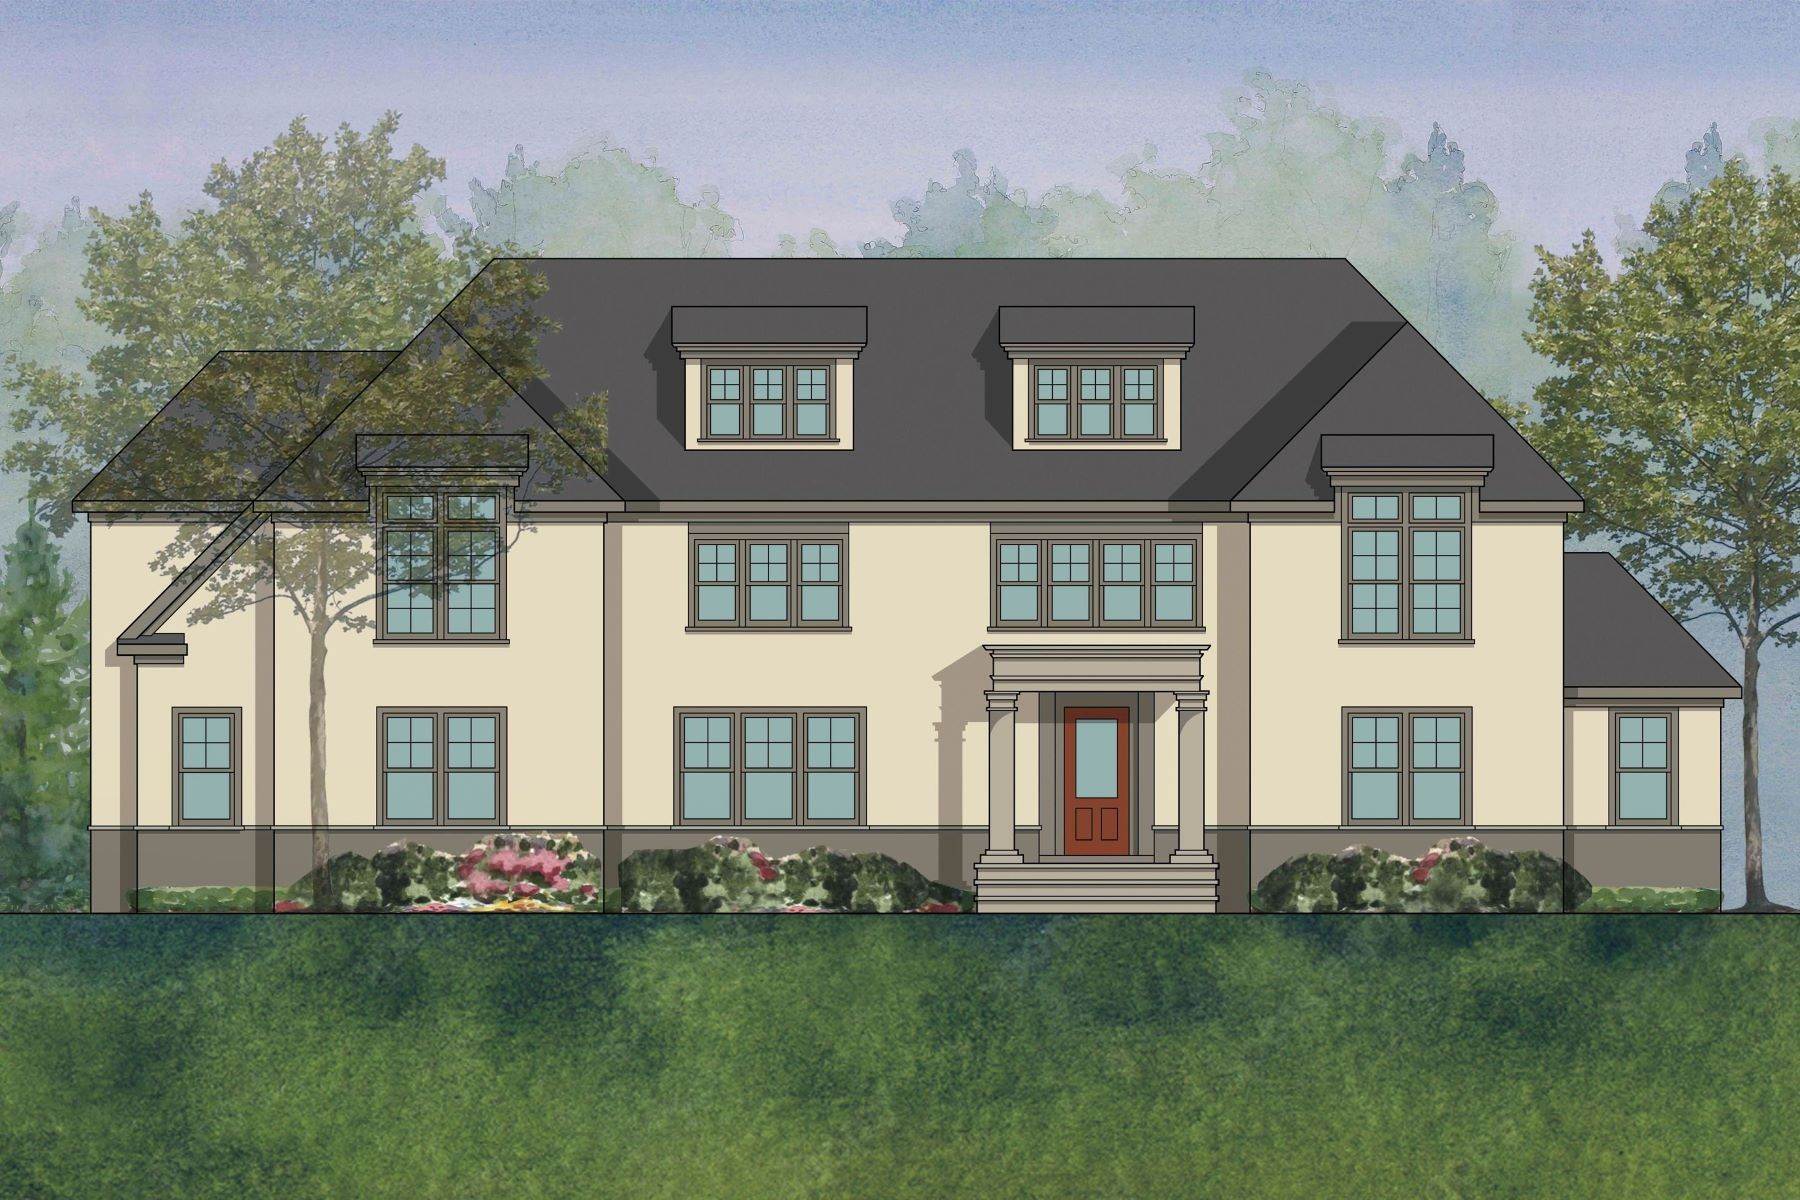 Single Family Homes for Sale at Introducing the Secluded Enclave of Prentice Woods 10 Prentice Lane, Princeton, New Jersey 08540 United States